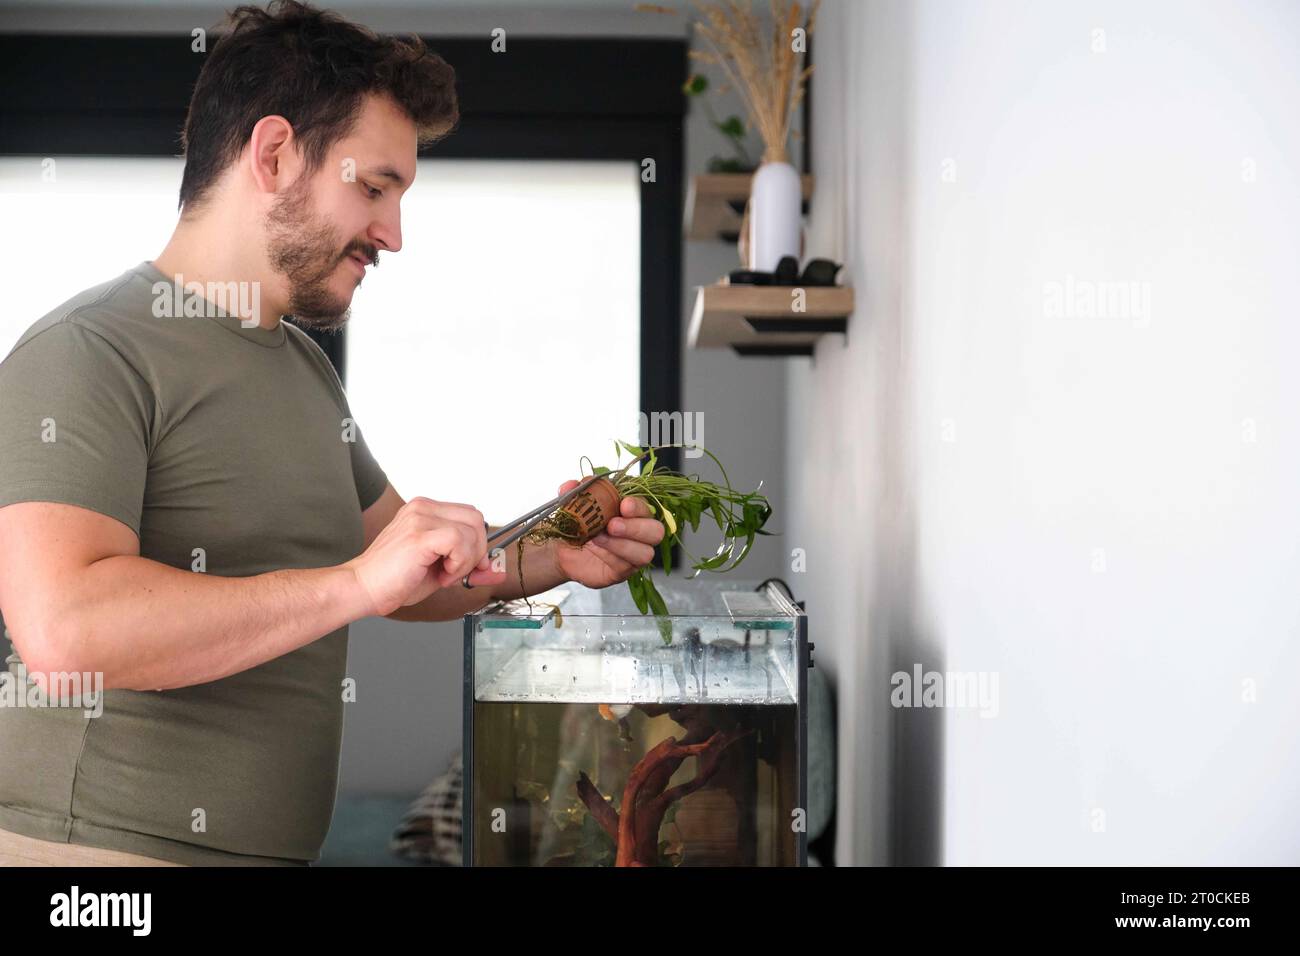 Man cutting the pot to plant new water plant, cryptocoryne x willisii, in aquarium at home. Stock Photo